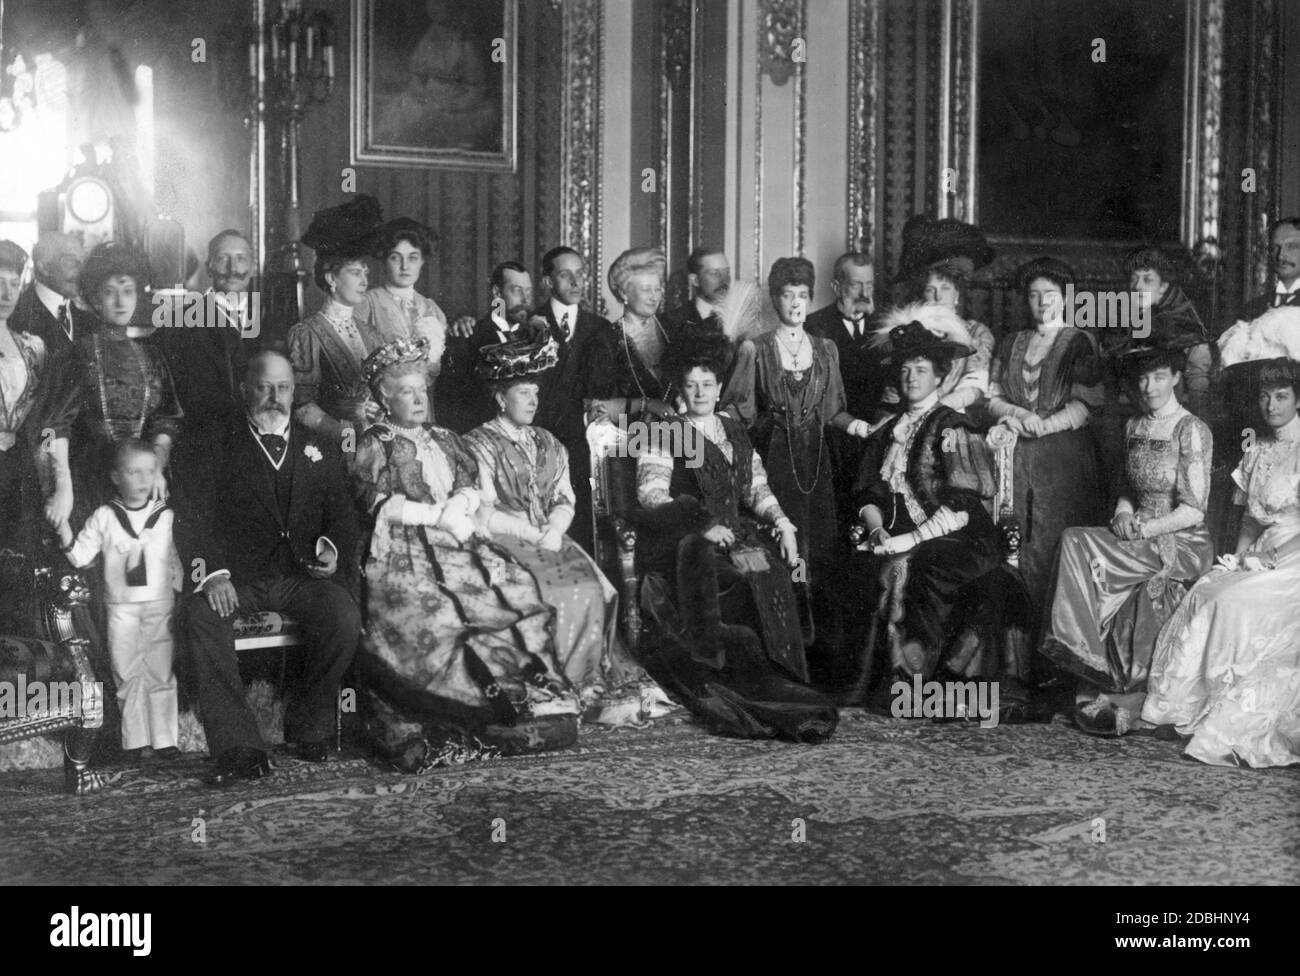 Group picture of the English royal family with international royal guests at Windsor Castle, in Wales in 1907. Bottom row from left: Prince Olaf of Norway, King Edward VII of Great Britain, Infanta Isabella of Spain, Princess Beatrice of Battenberg, Grand Duchess Maria of Russia, Queen Amelie of Portugal, Duchess Helene of Aosta, Princess Maria Immaculata of Saxony. Second row: Duchess Louise of Fife, Duke Arthur of Connaught, Queen Maud of Norway, Emperor Wilhelm II, Mary Princess of Wales (later Queen Mary of England), Princess Patricia of Connaught, George Prince of Wales (later George V), Stock Photo